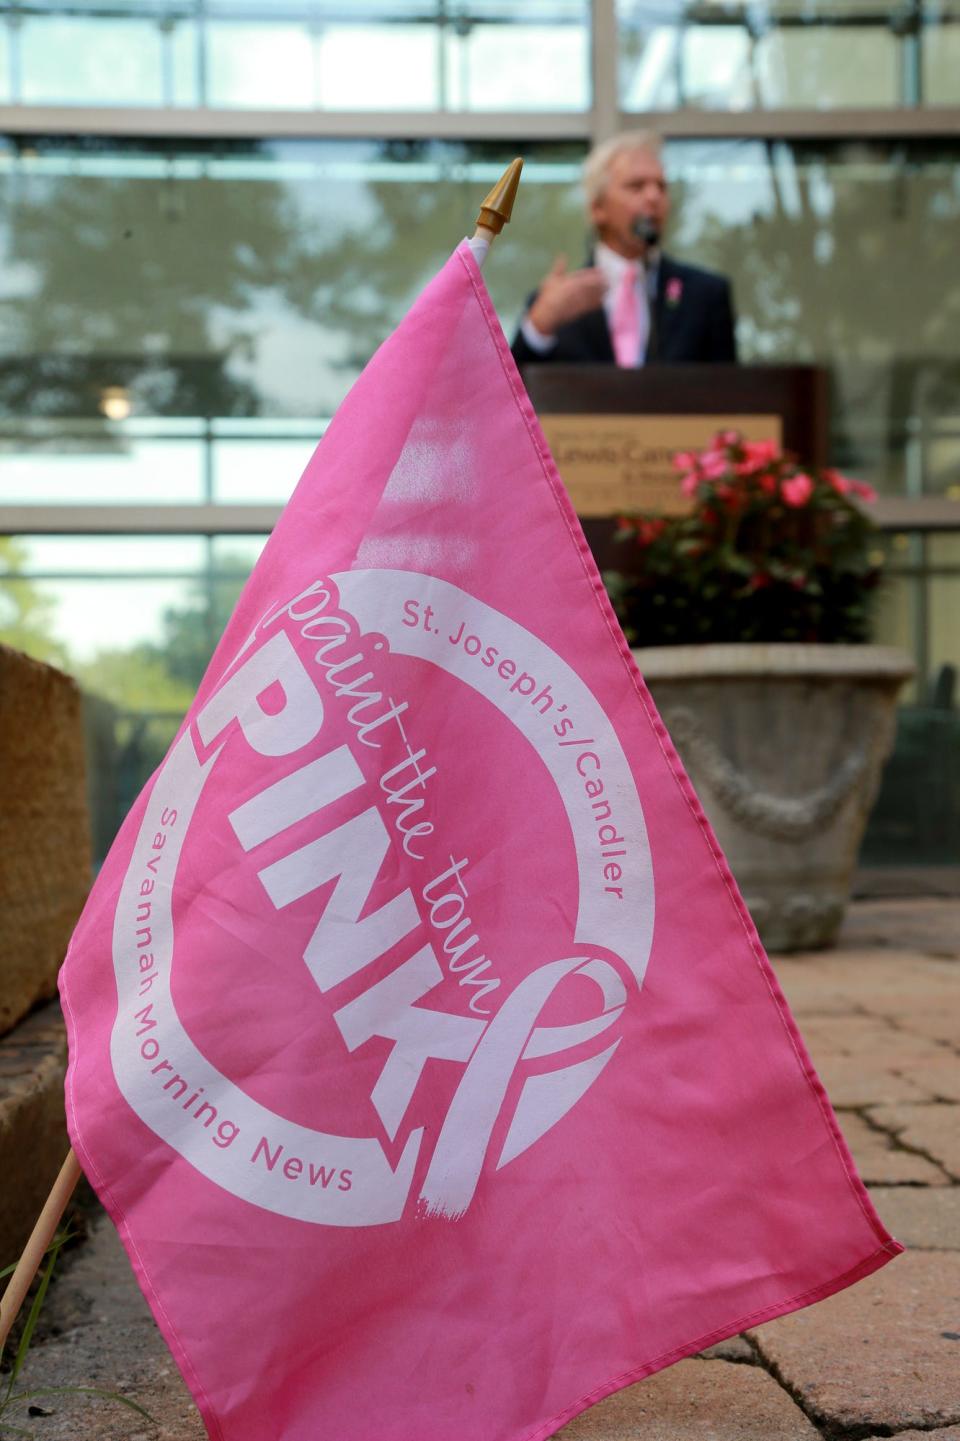 October's start signals the kickoff of the annual Paint the Town Pink Breast Cancer Awareness campaign.